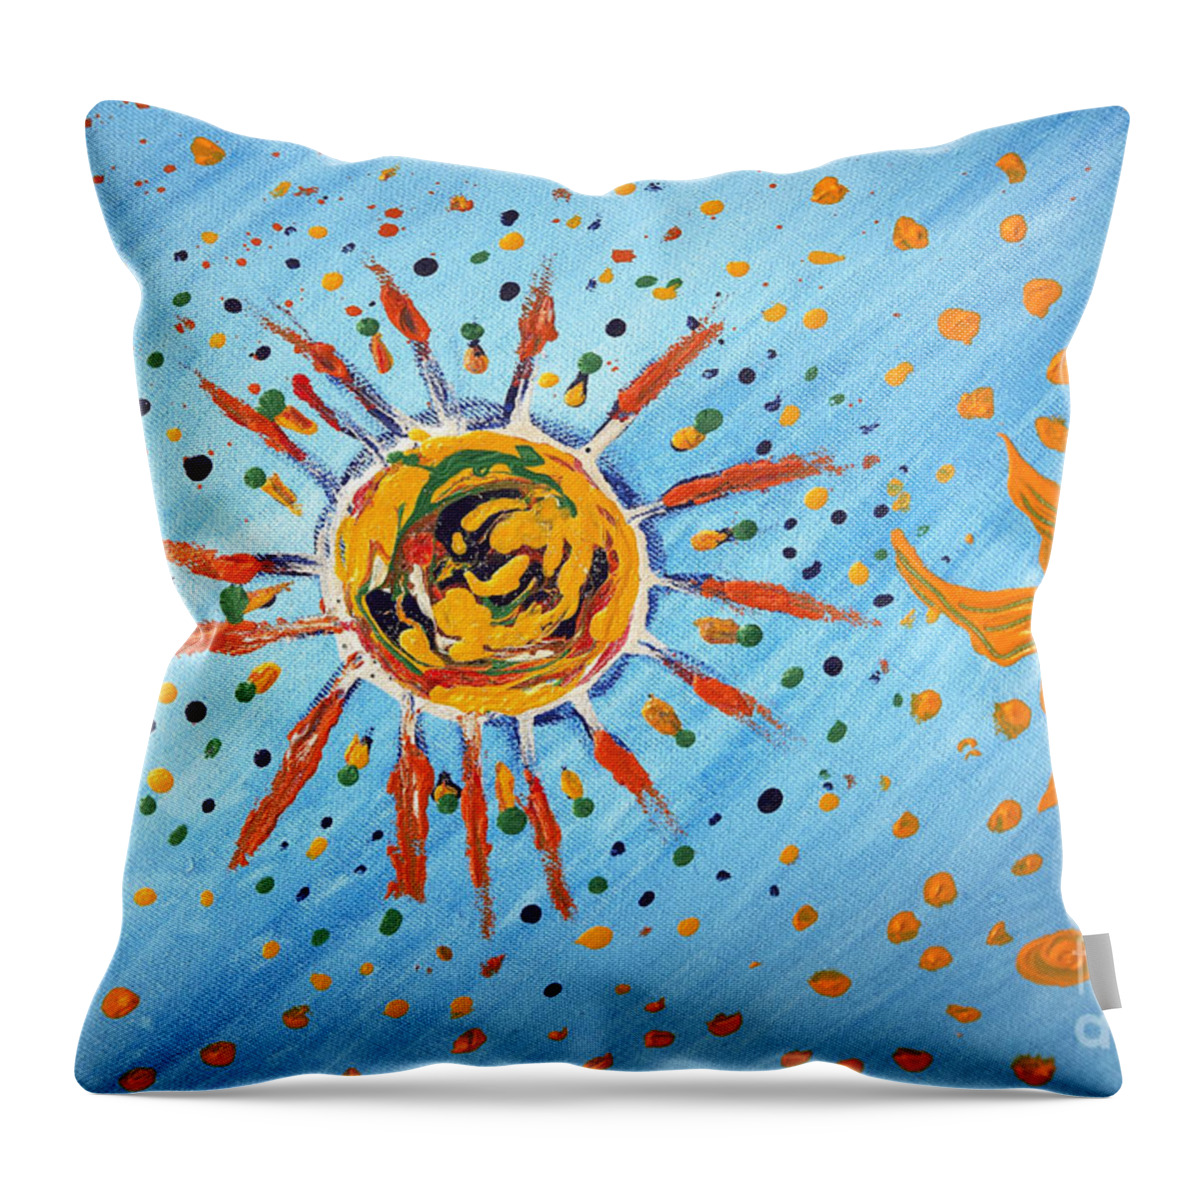 Munich Heart Throw Pillow featuring the painting Be like the sun by Heidi Sieber